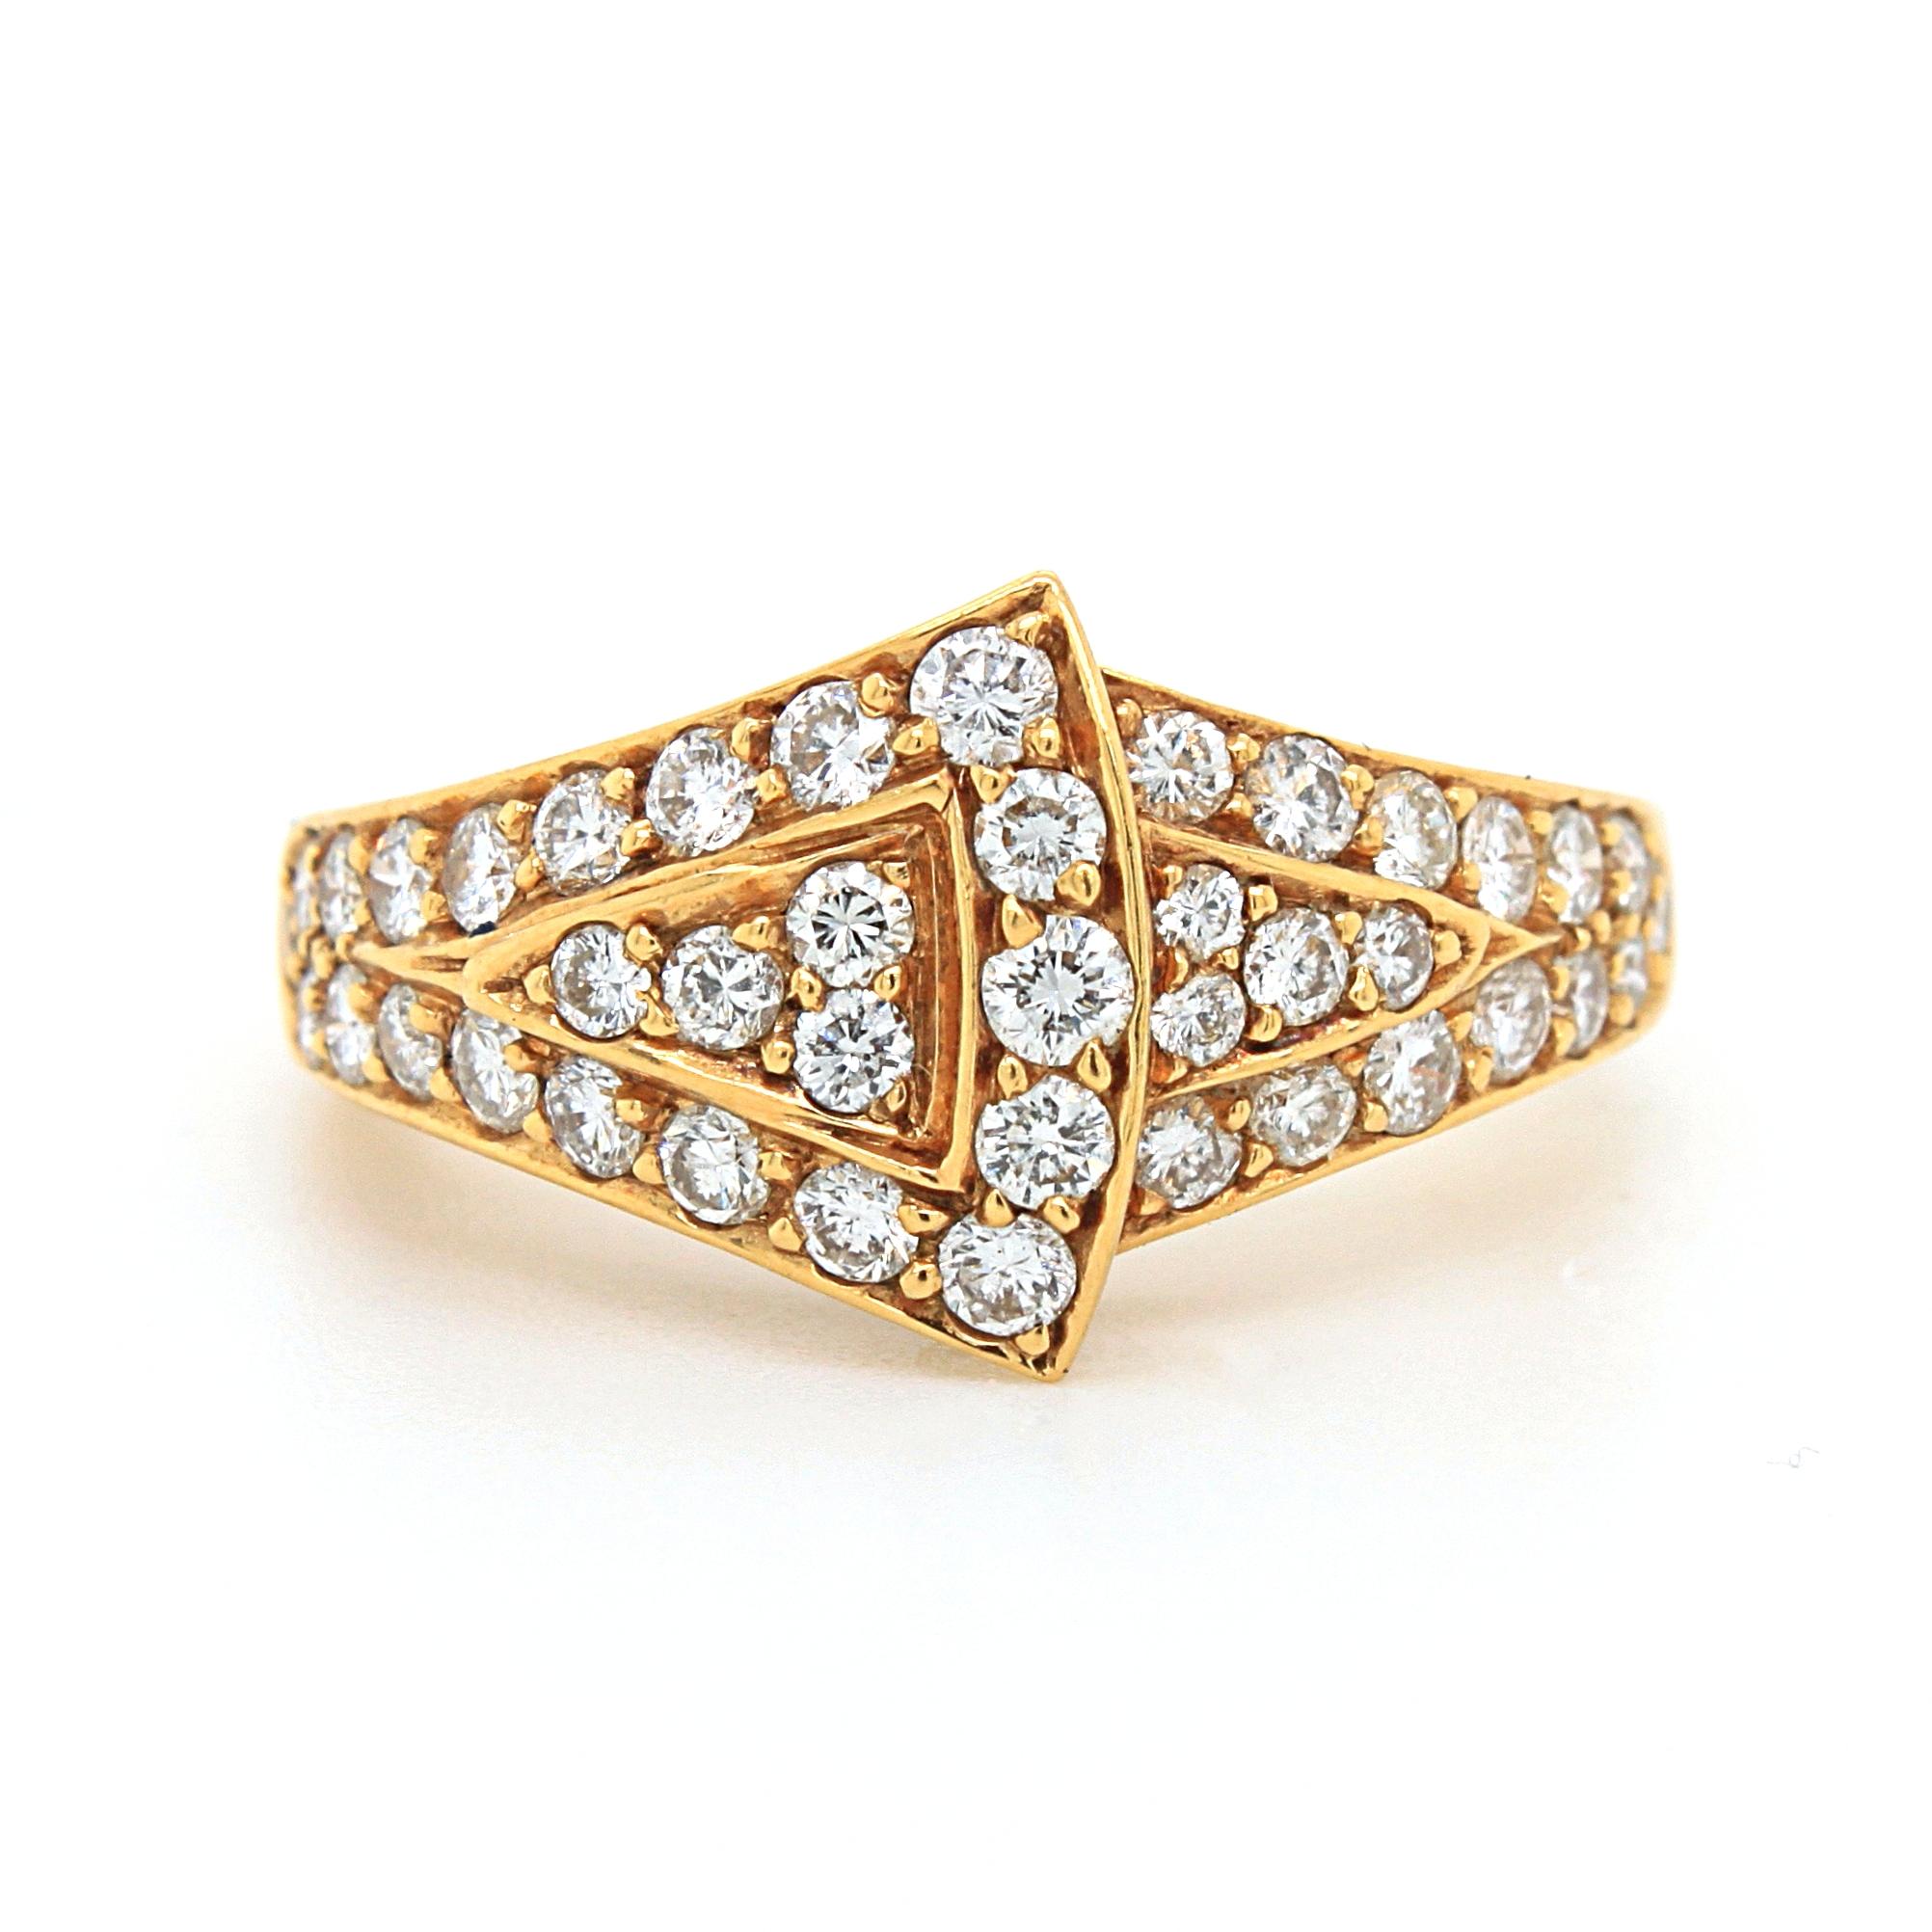 Round Cut Geometric Diamond Ring in 18k Yellow Gold, by Chaumet, 20th Century